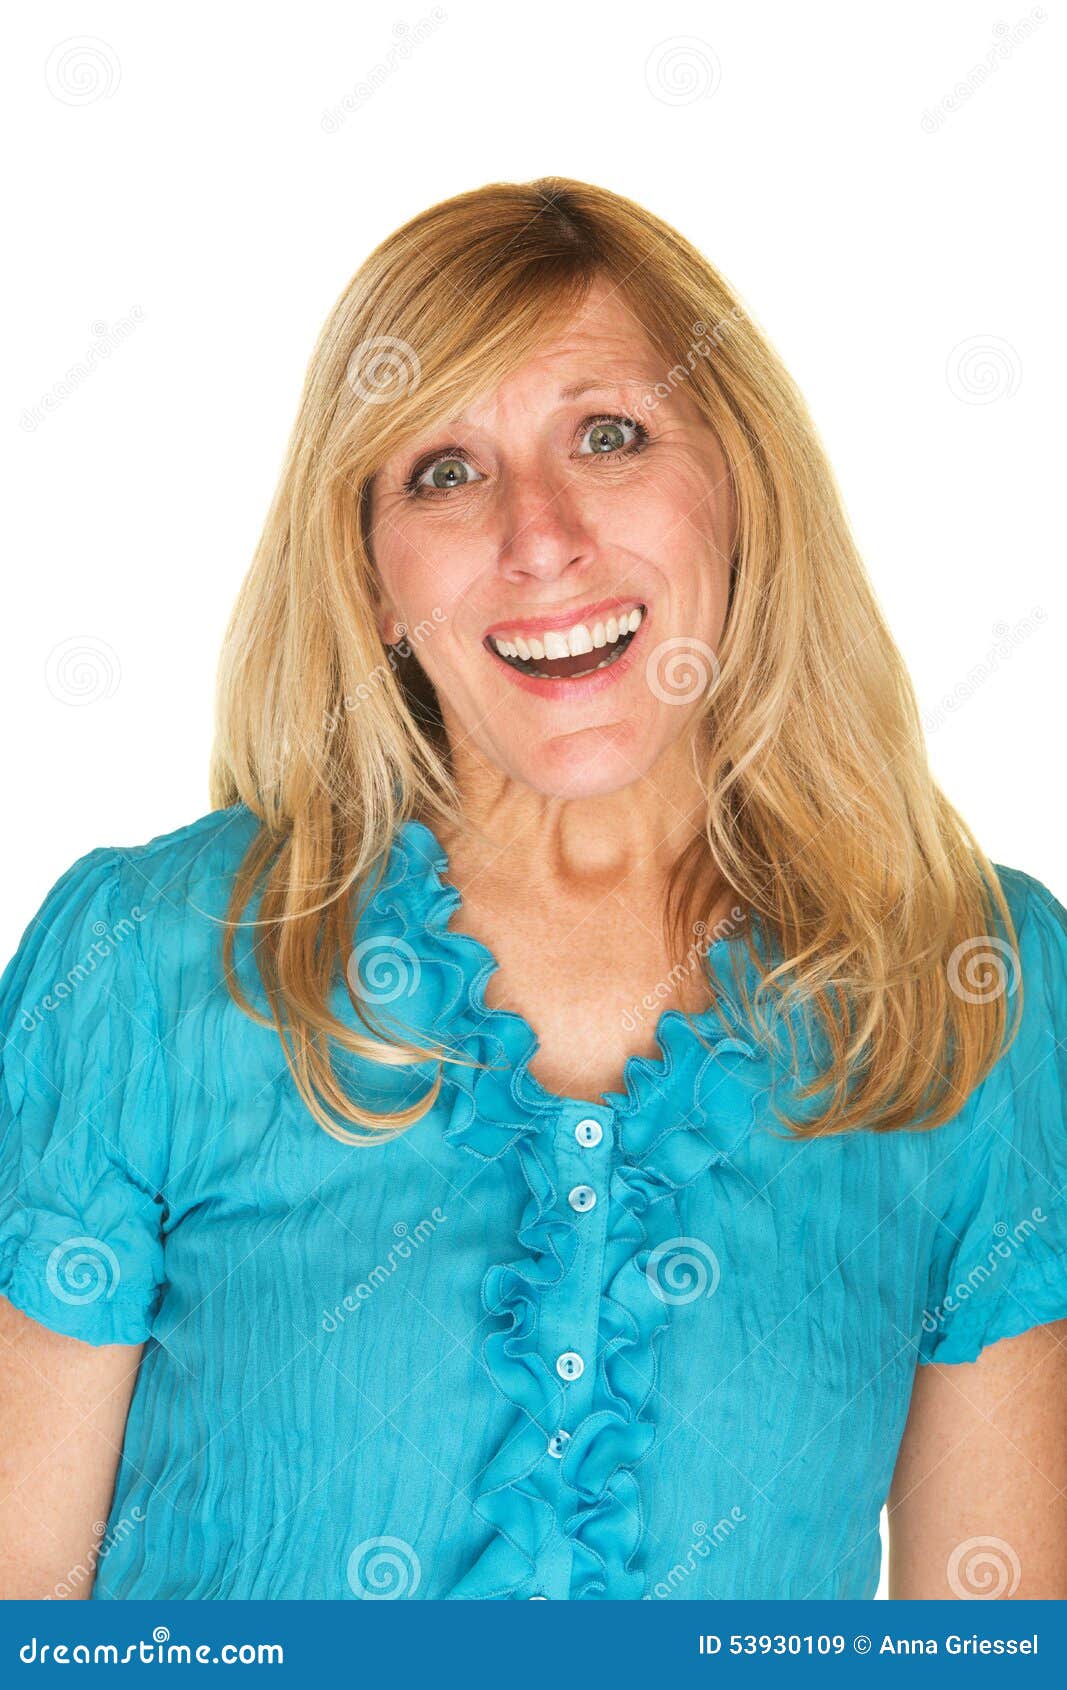 glad woman with smile